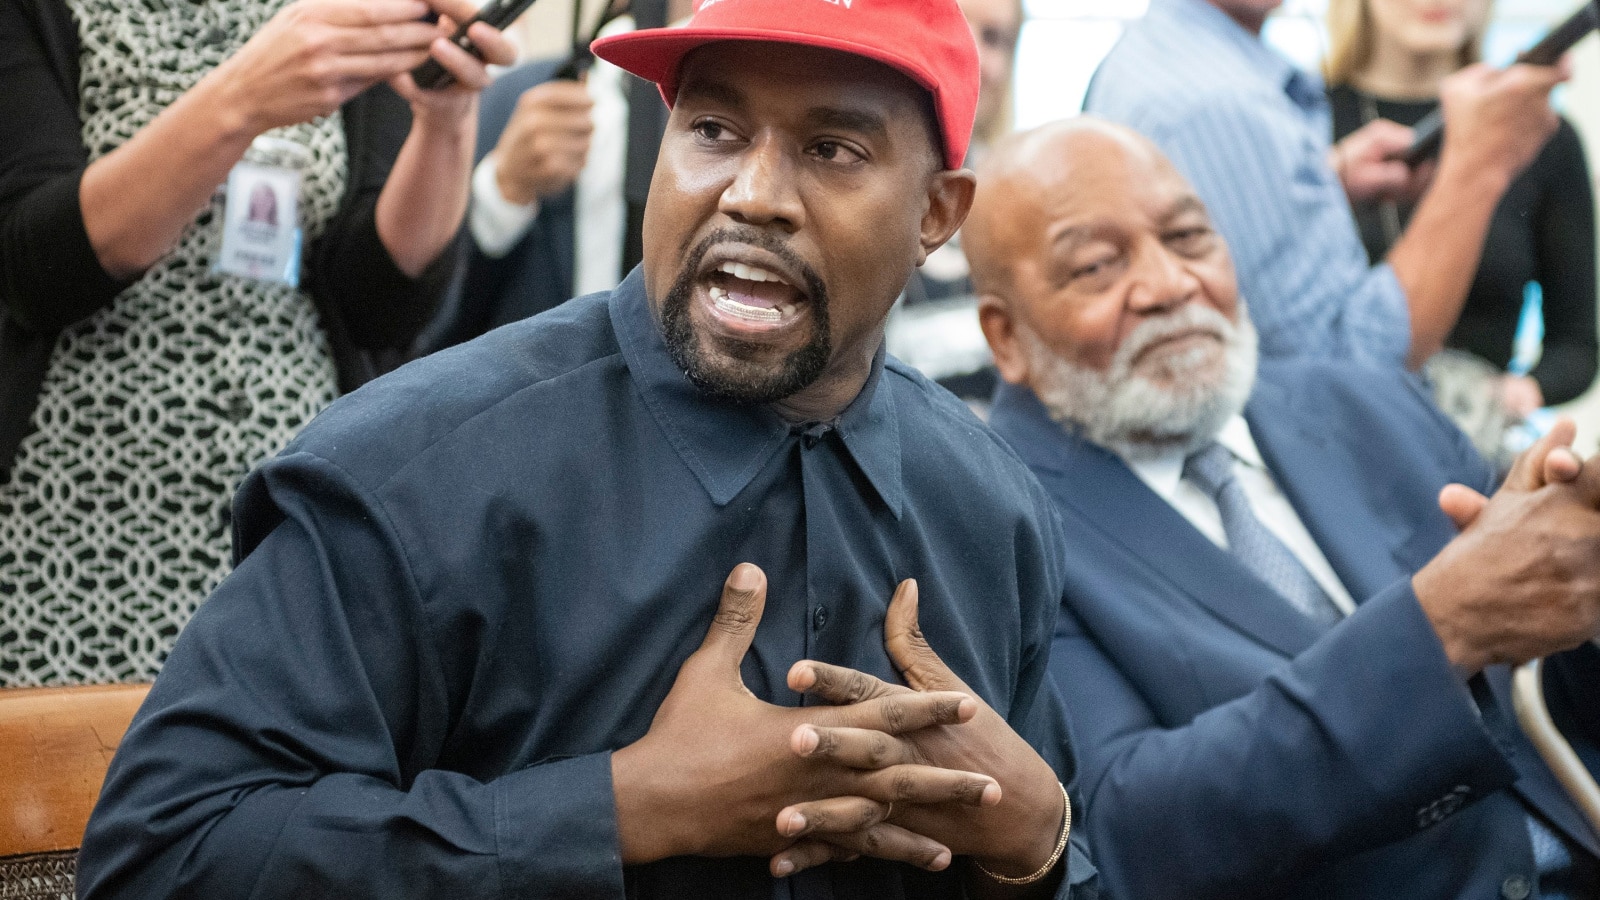 Washington, DC US - Oct 11, 2018: Jim Brown looks on as Kanye West speaks as he meets with US President Donald J. Trump in the White House Oval Office. Credit: Ron Sachs - CNP